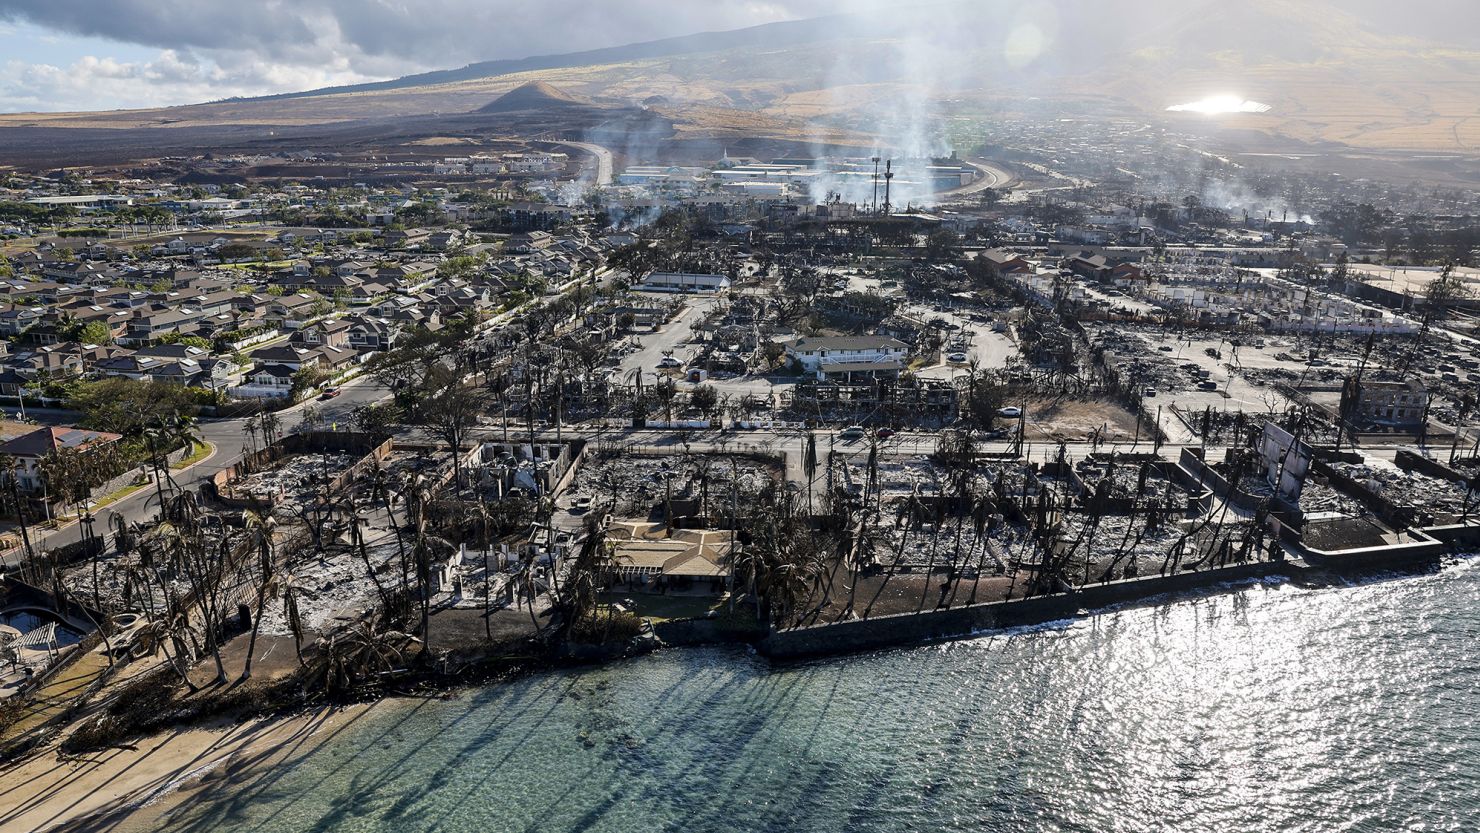 Lahaina was still smoldering in this photo taken a few days after last month's fire.  